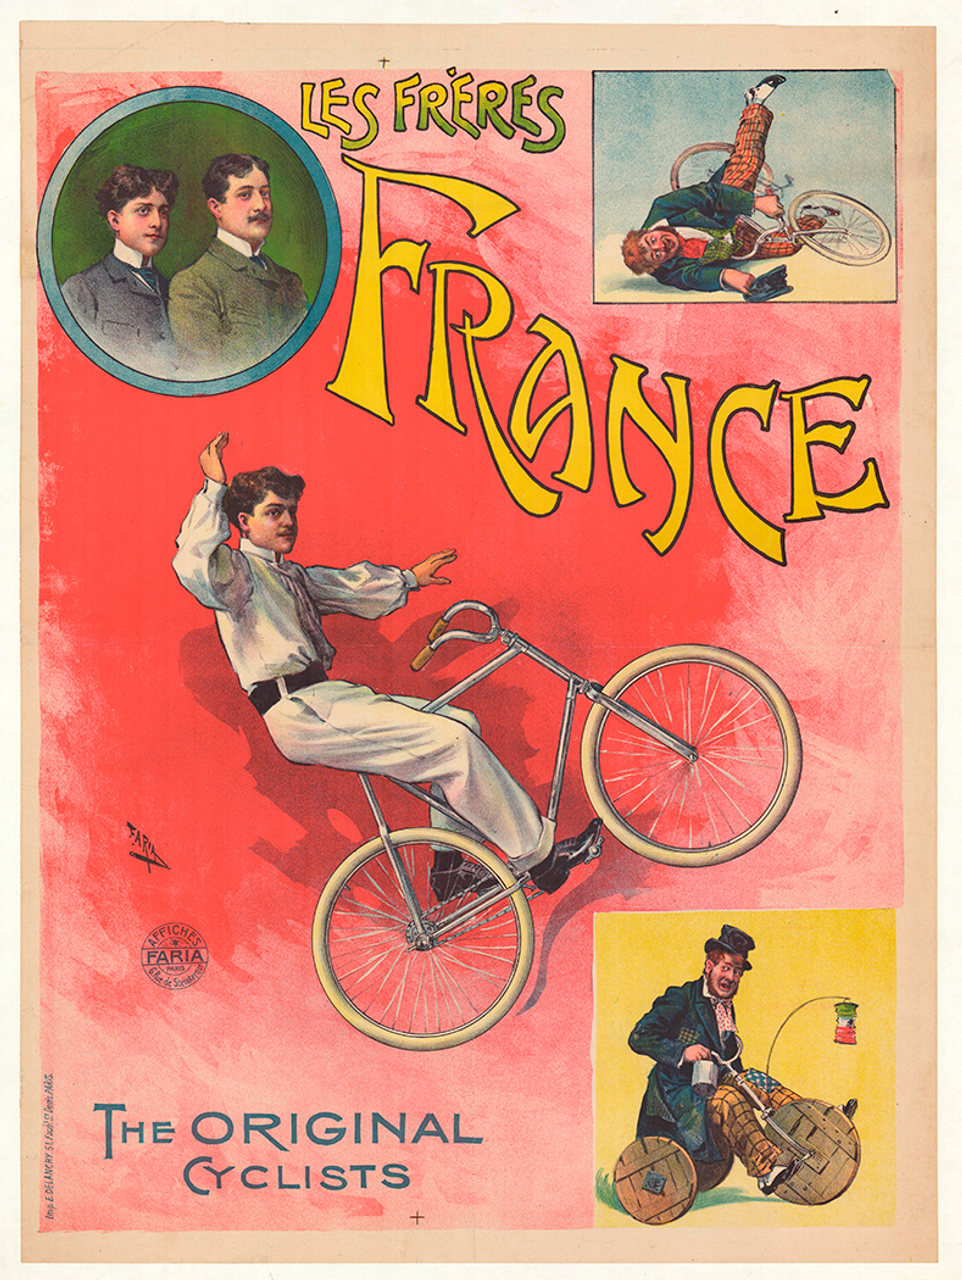 Les Freres France Original Vintage Bicycle Poster by Faria